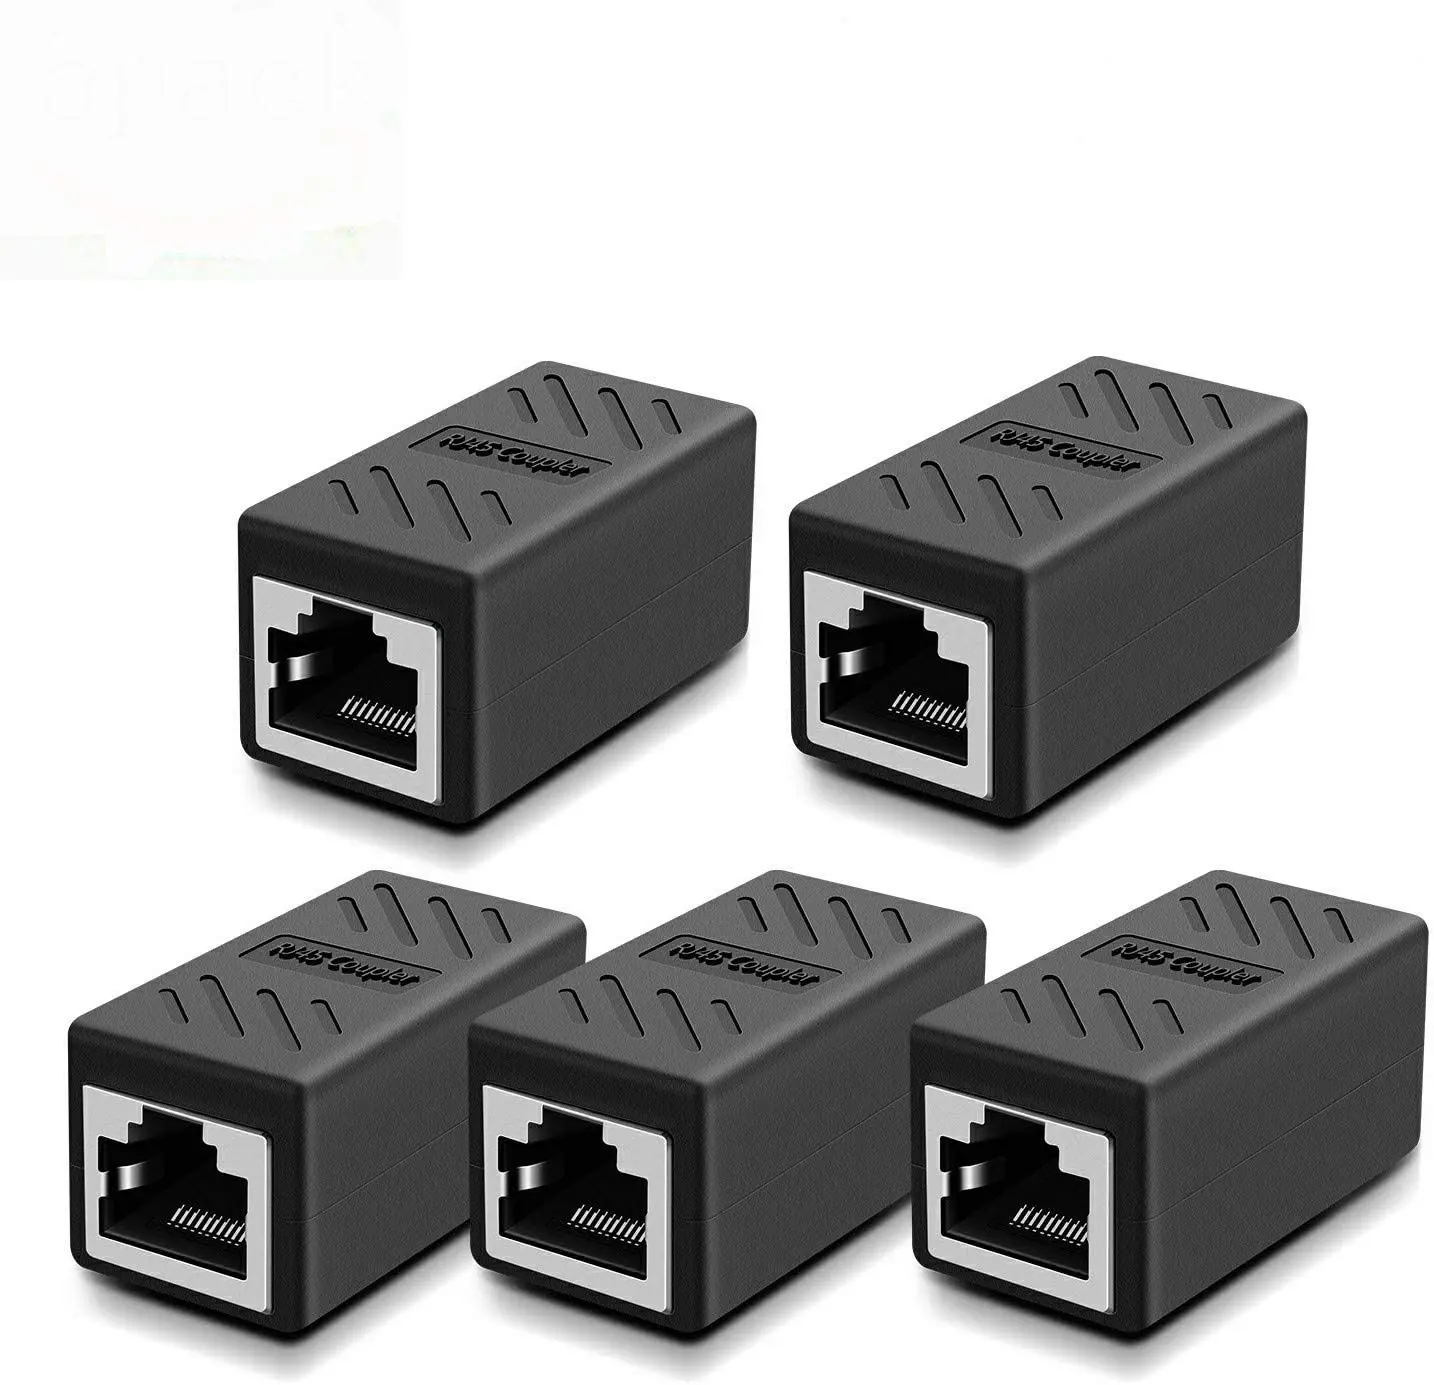 

RJ45 Ethernet Connectors Hielded in-Line Coupler for Cat7/Cat6/Cat5e/Cat5 Ethernet Cable Extender Connector - Female to Female, Black